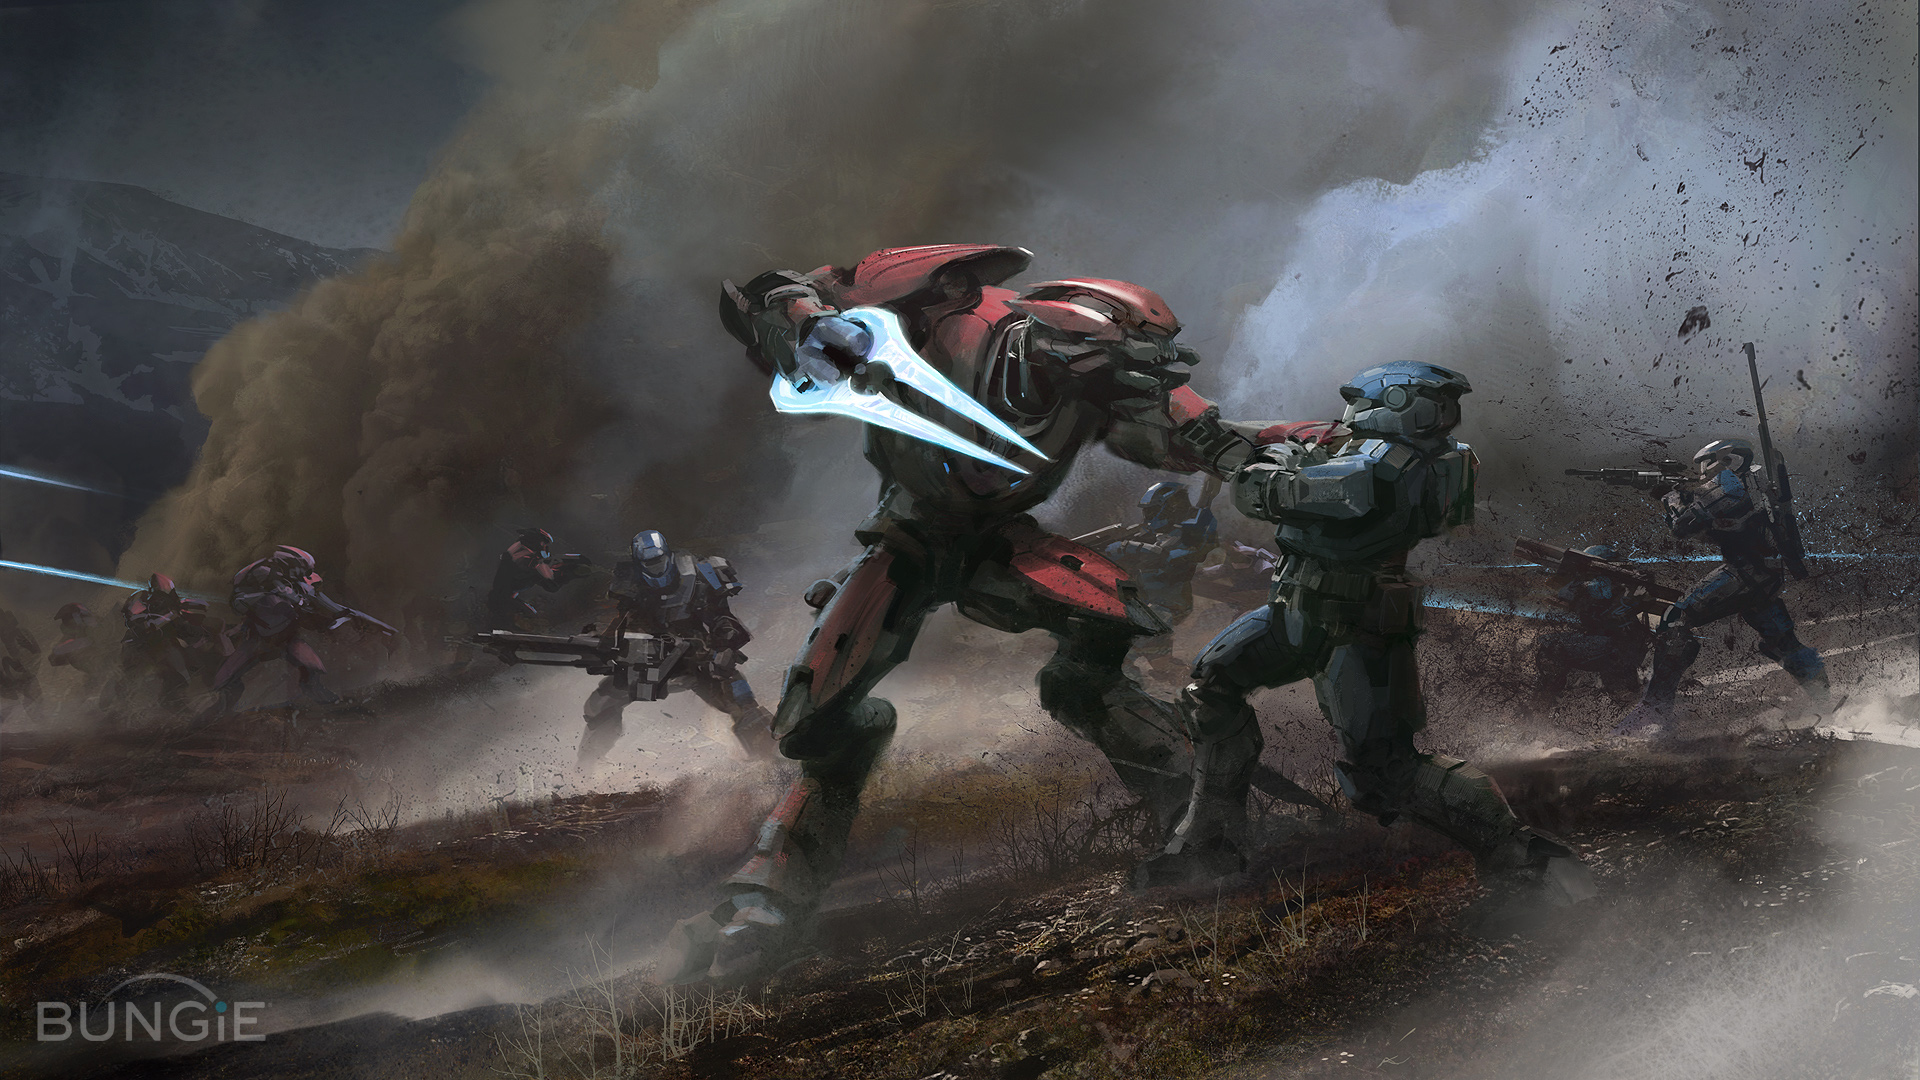 Halo Zealot Spartan engaging in a battle execution